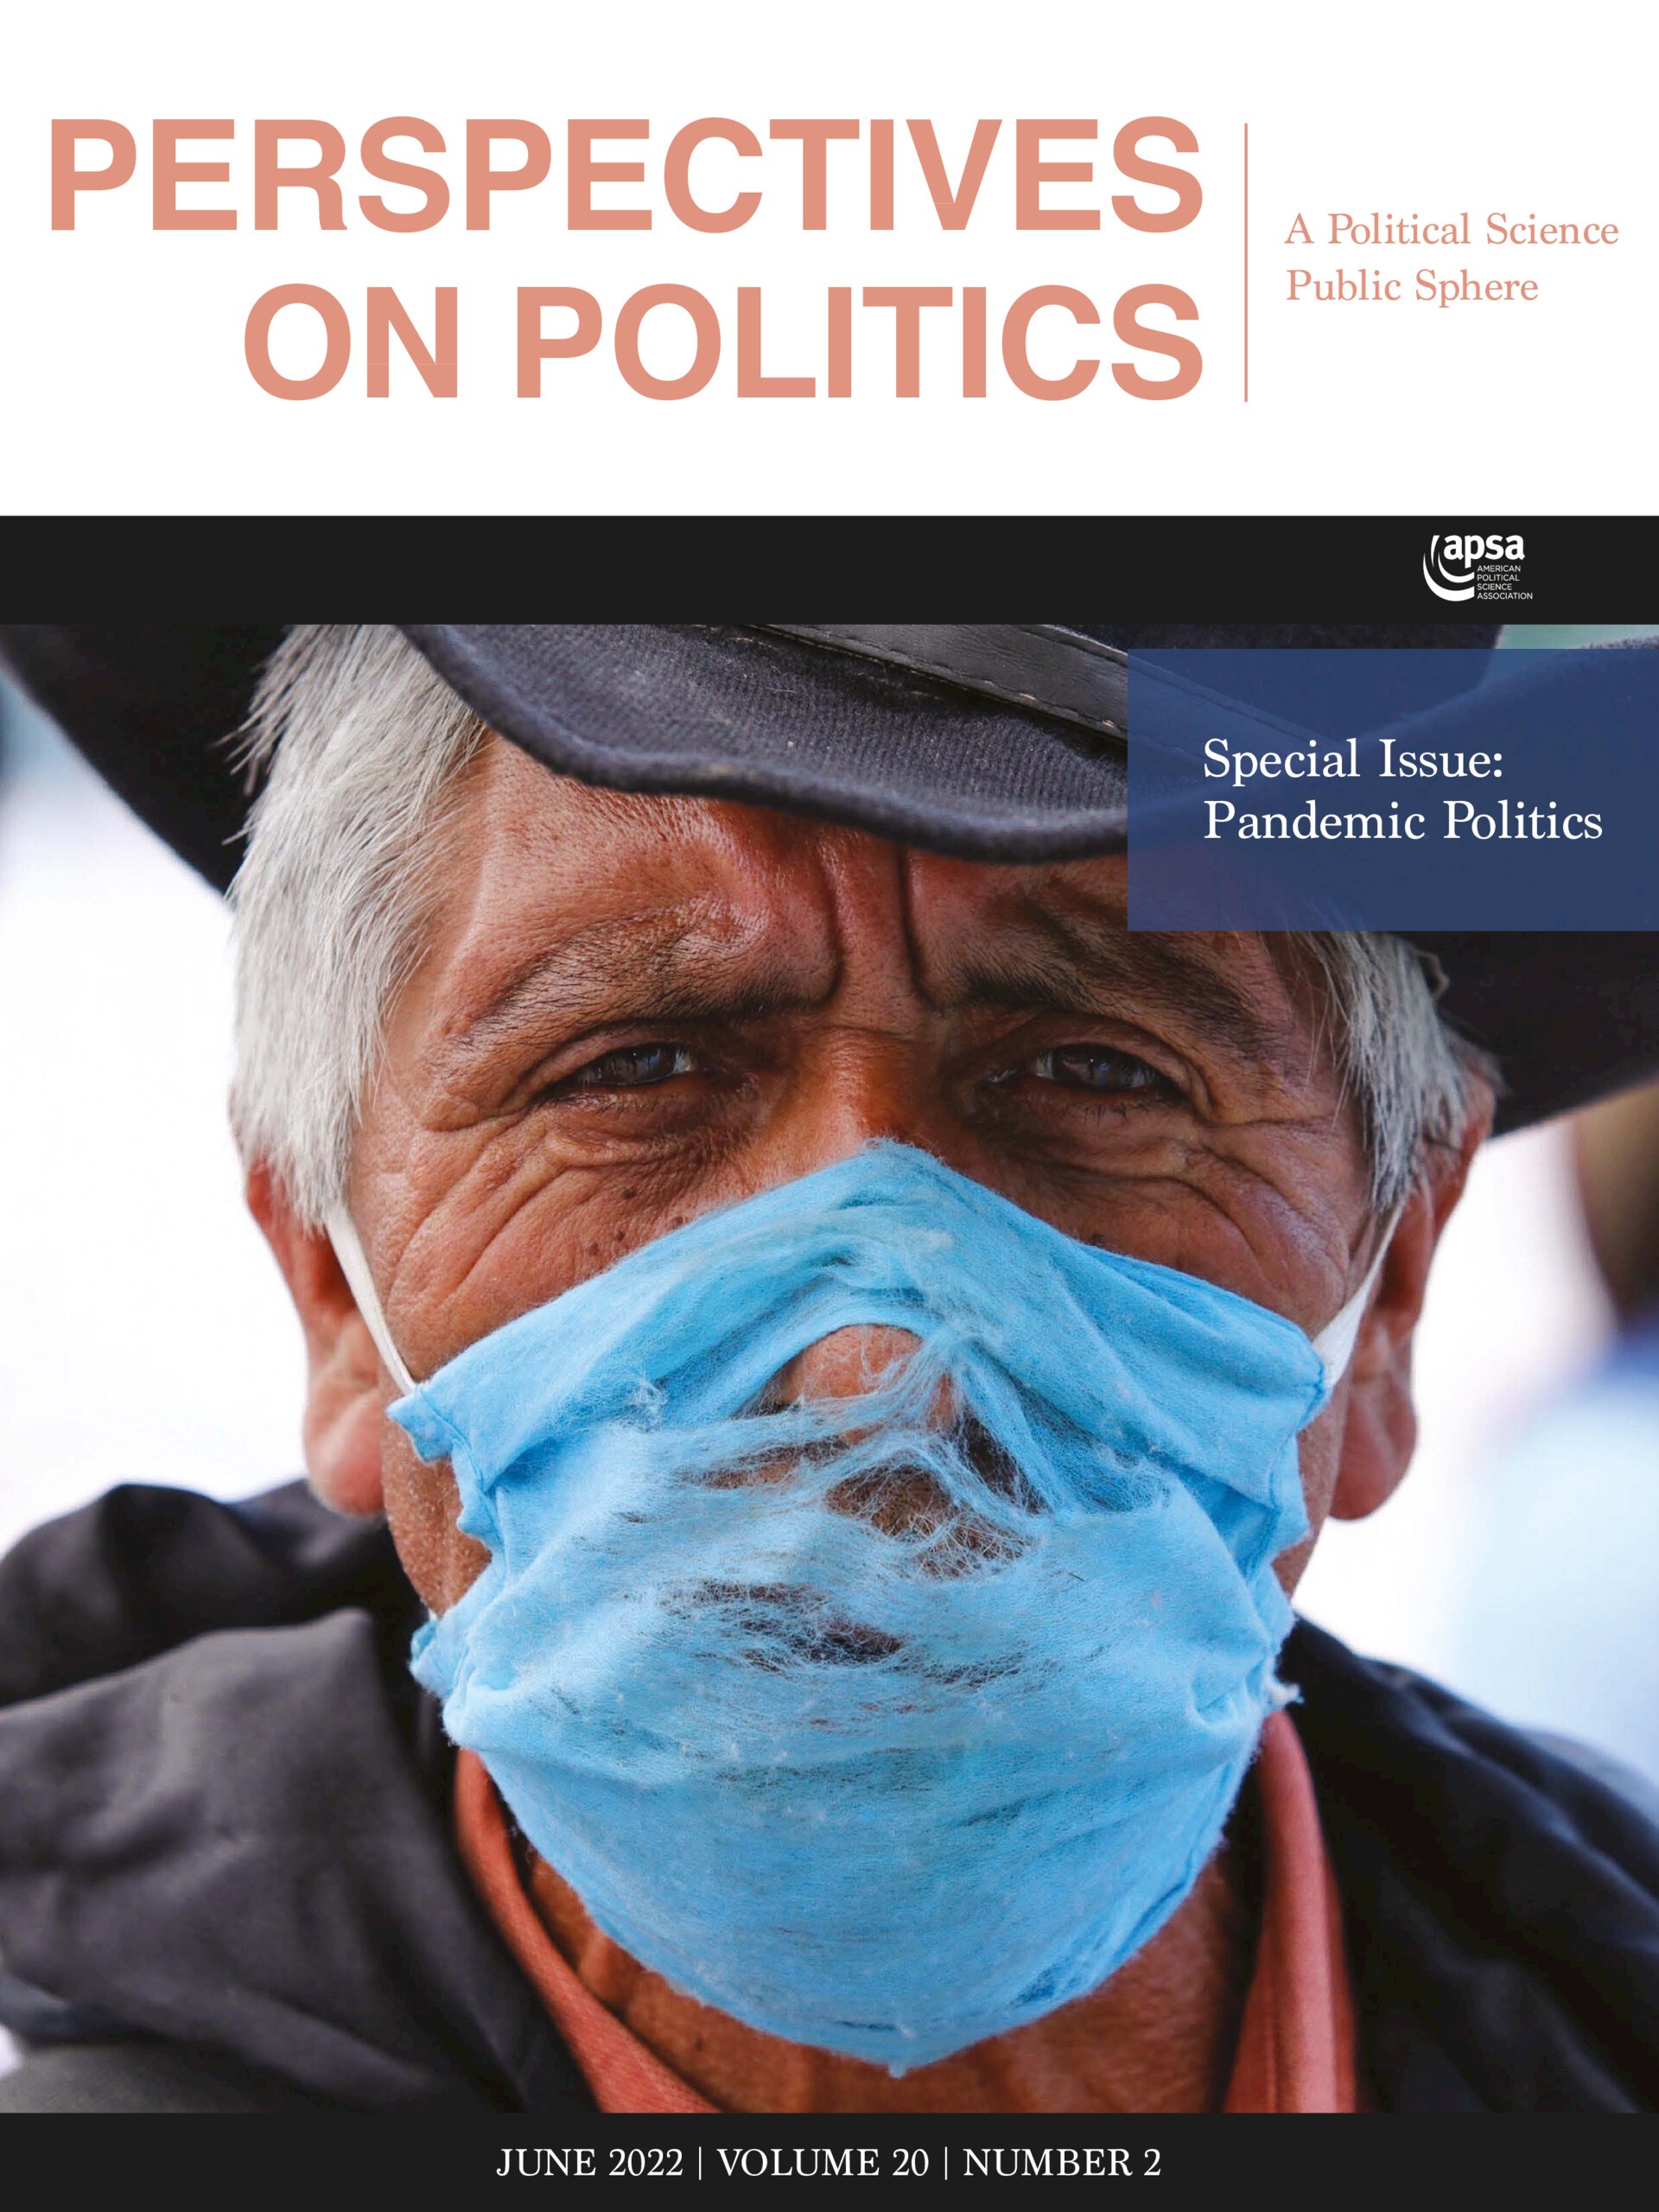 Journal cover with man wearing a COVID mask 